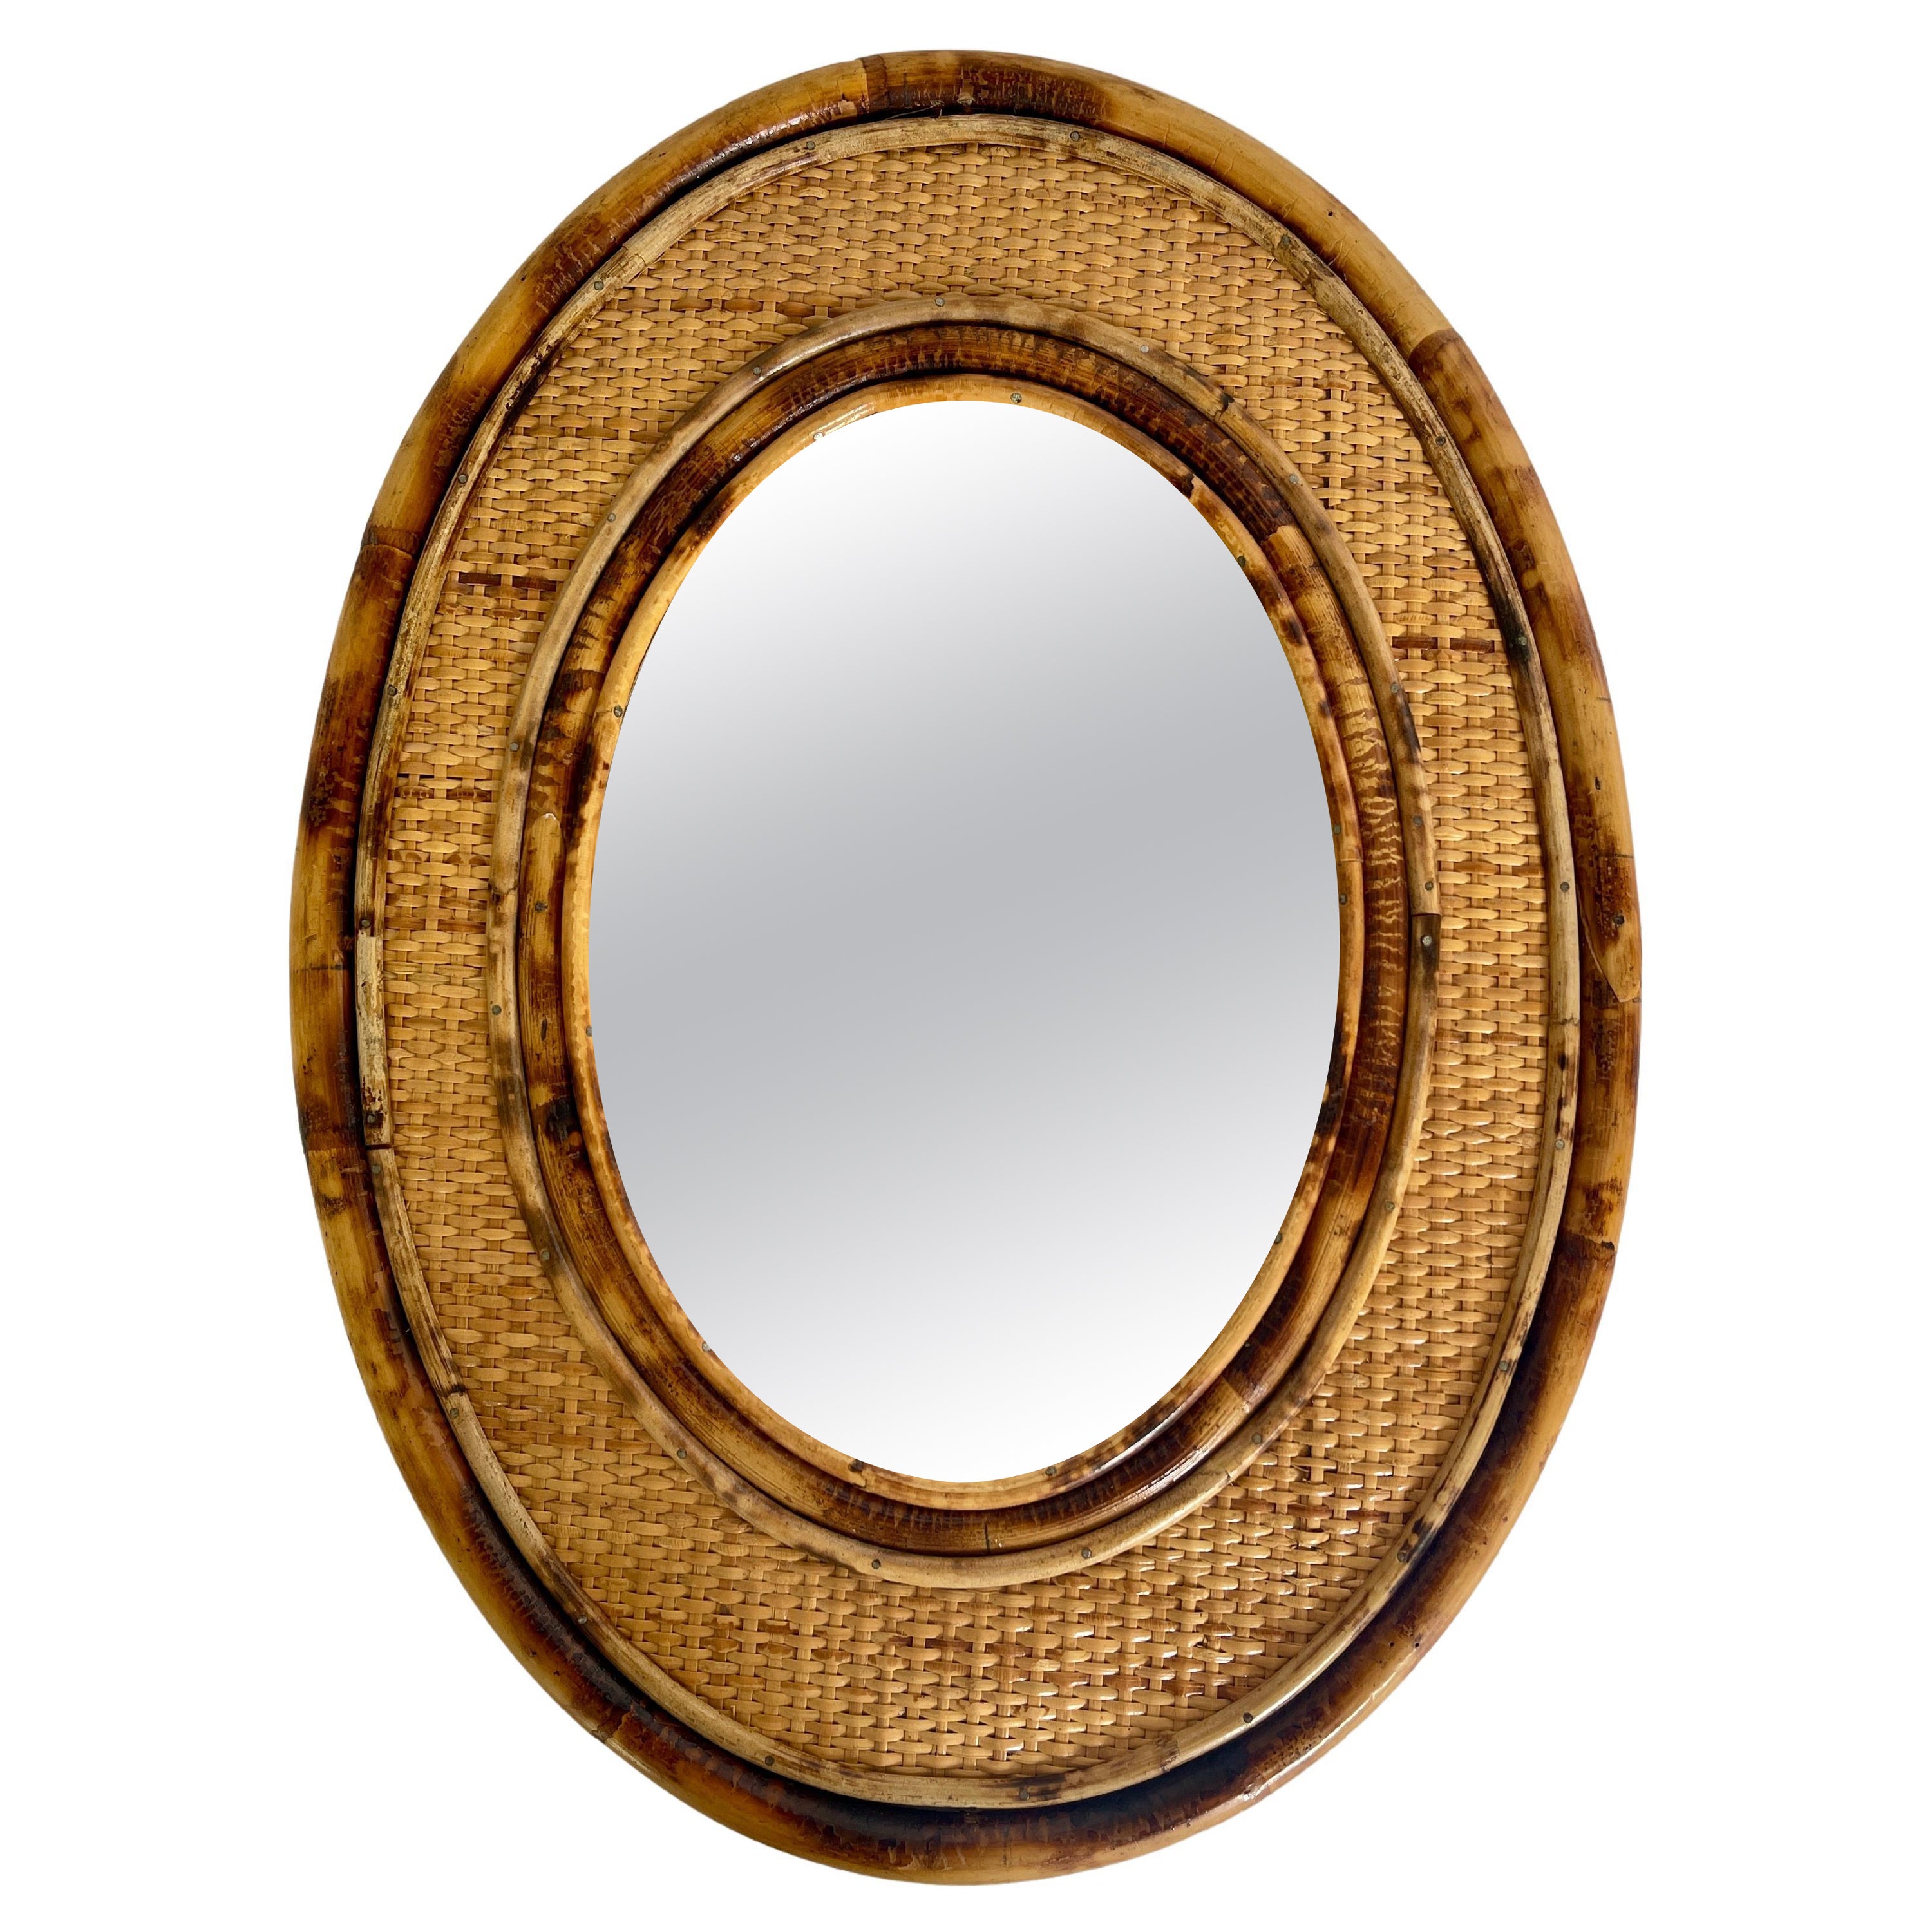  1970's Bamboo Framed Rattan Oval Mirror